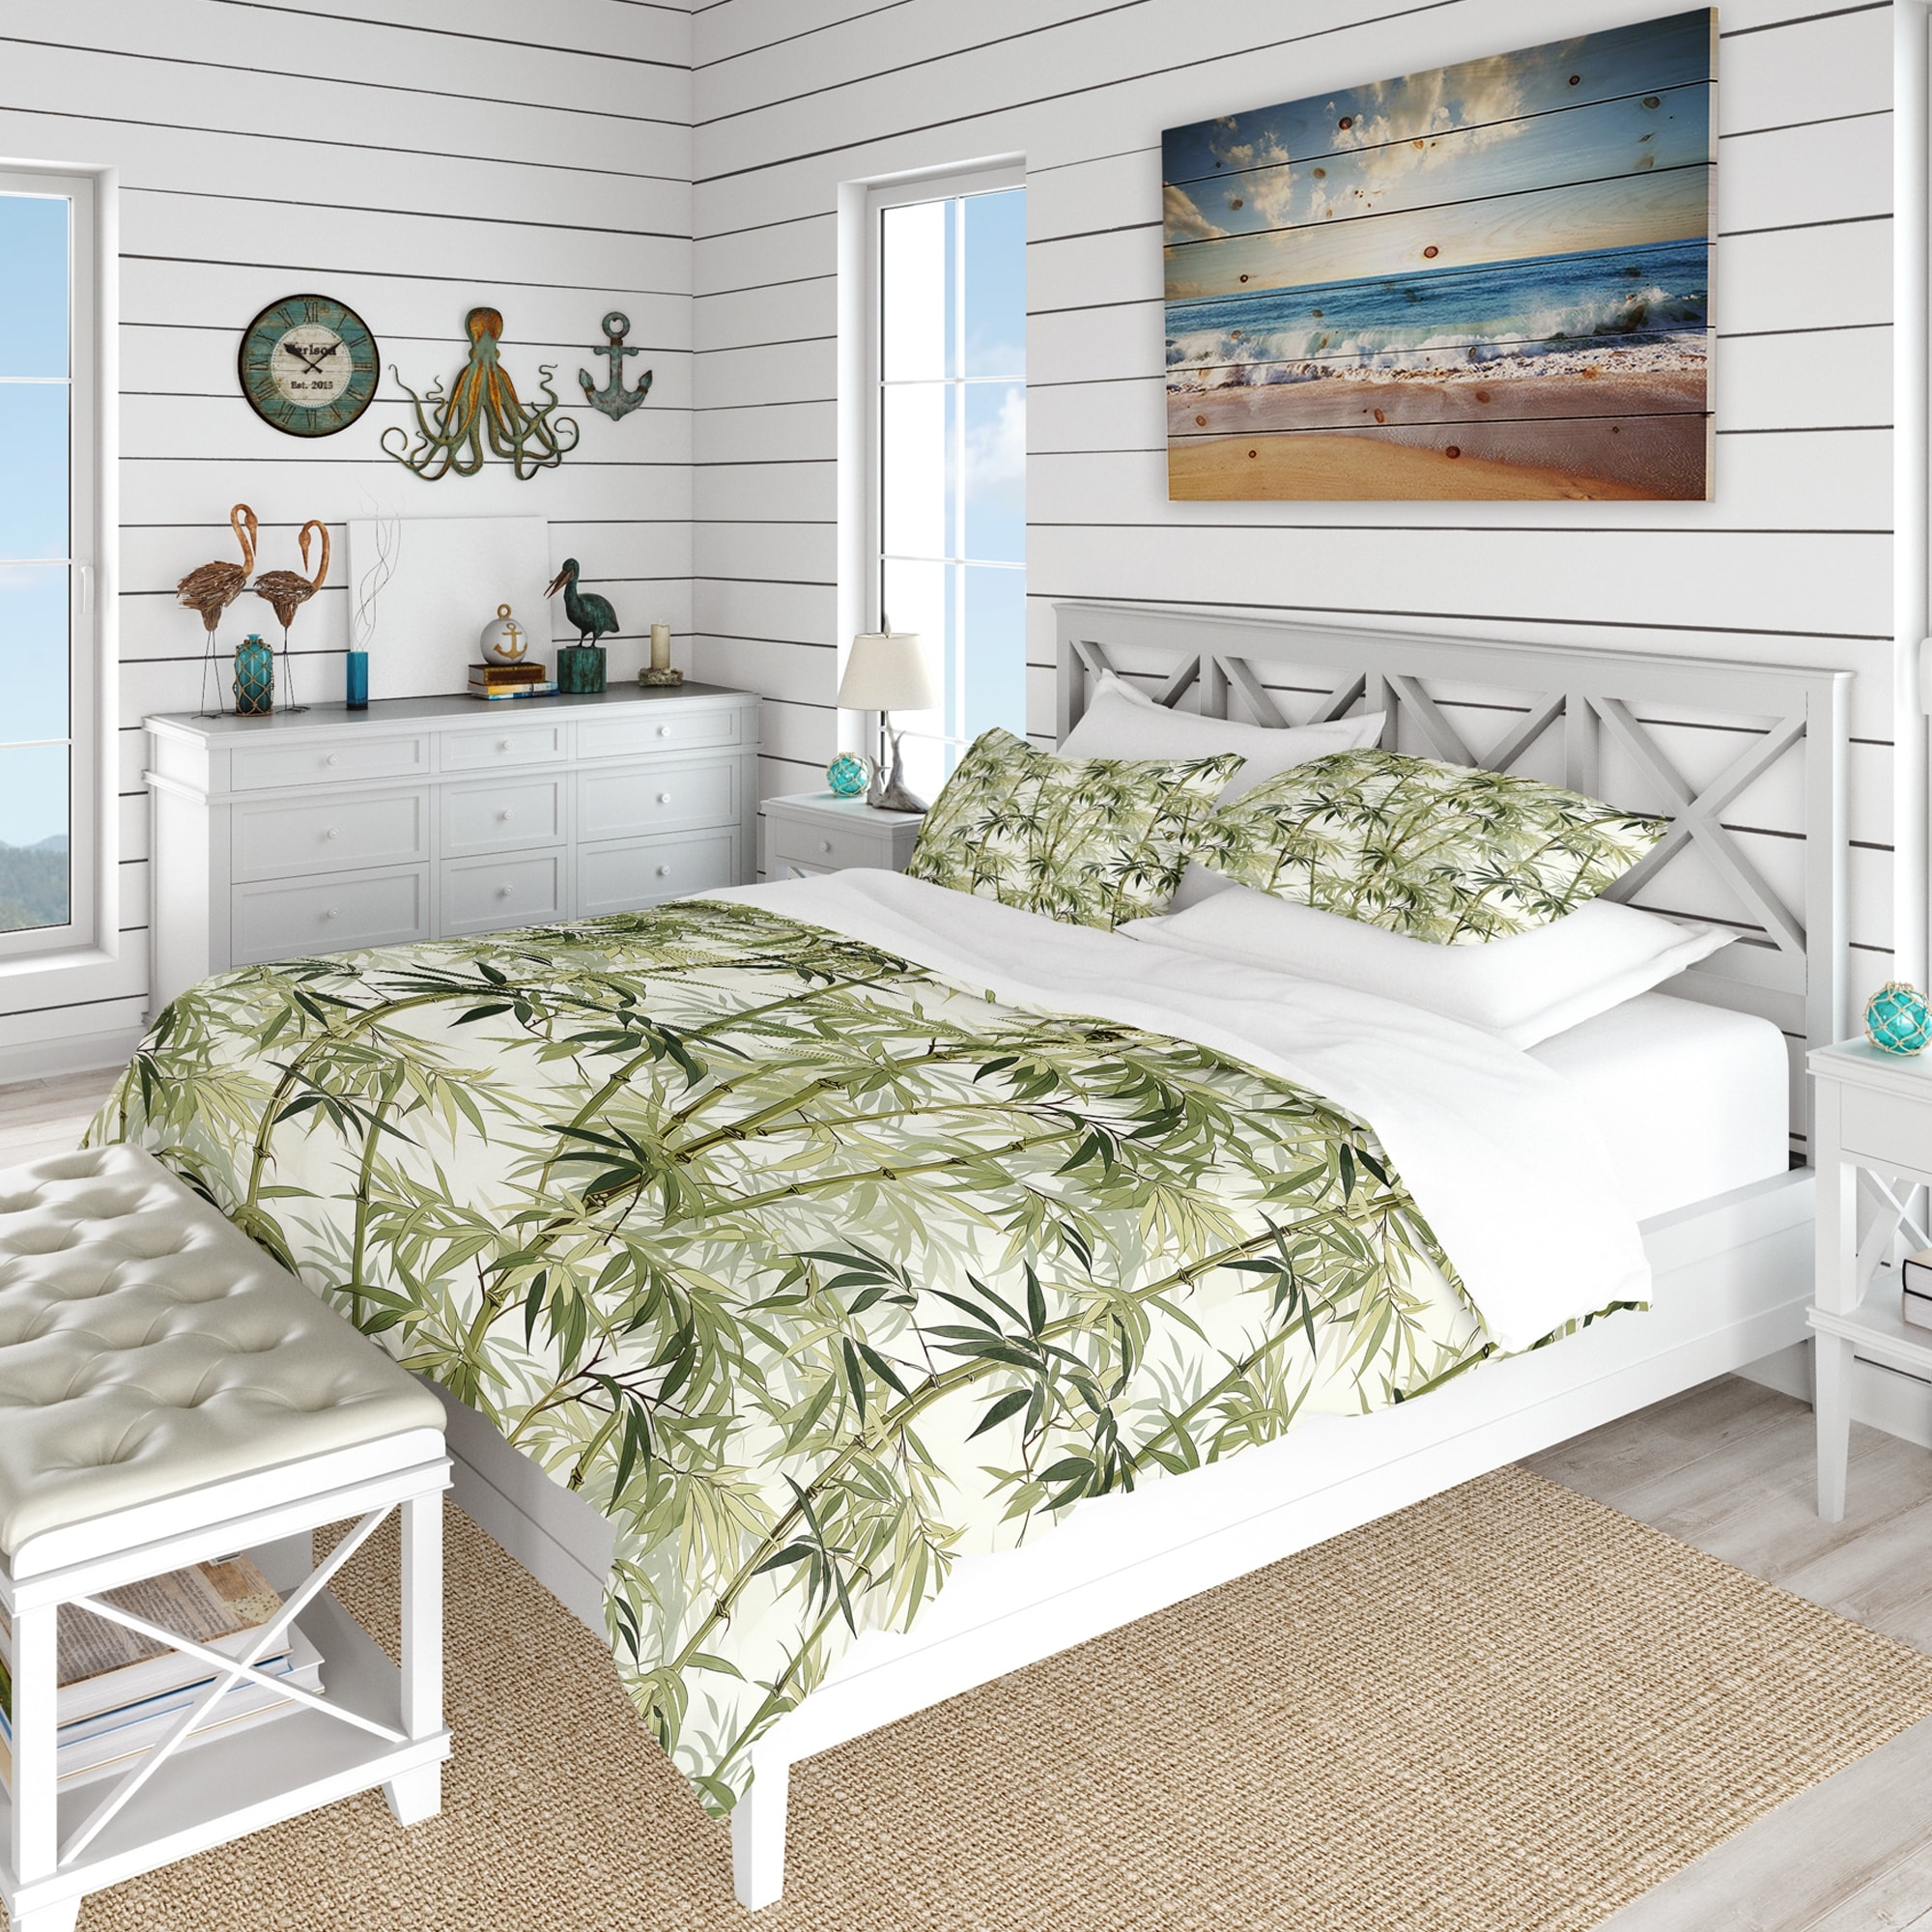 Green Floral Duvet Covers and Sets - Bed Bath & Beyond